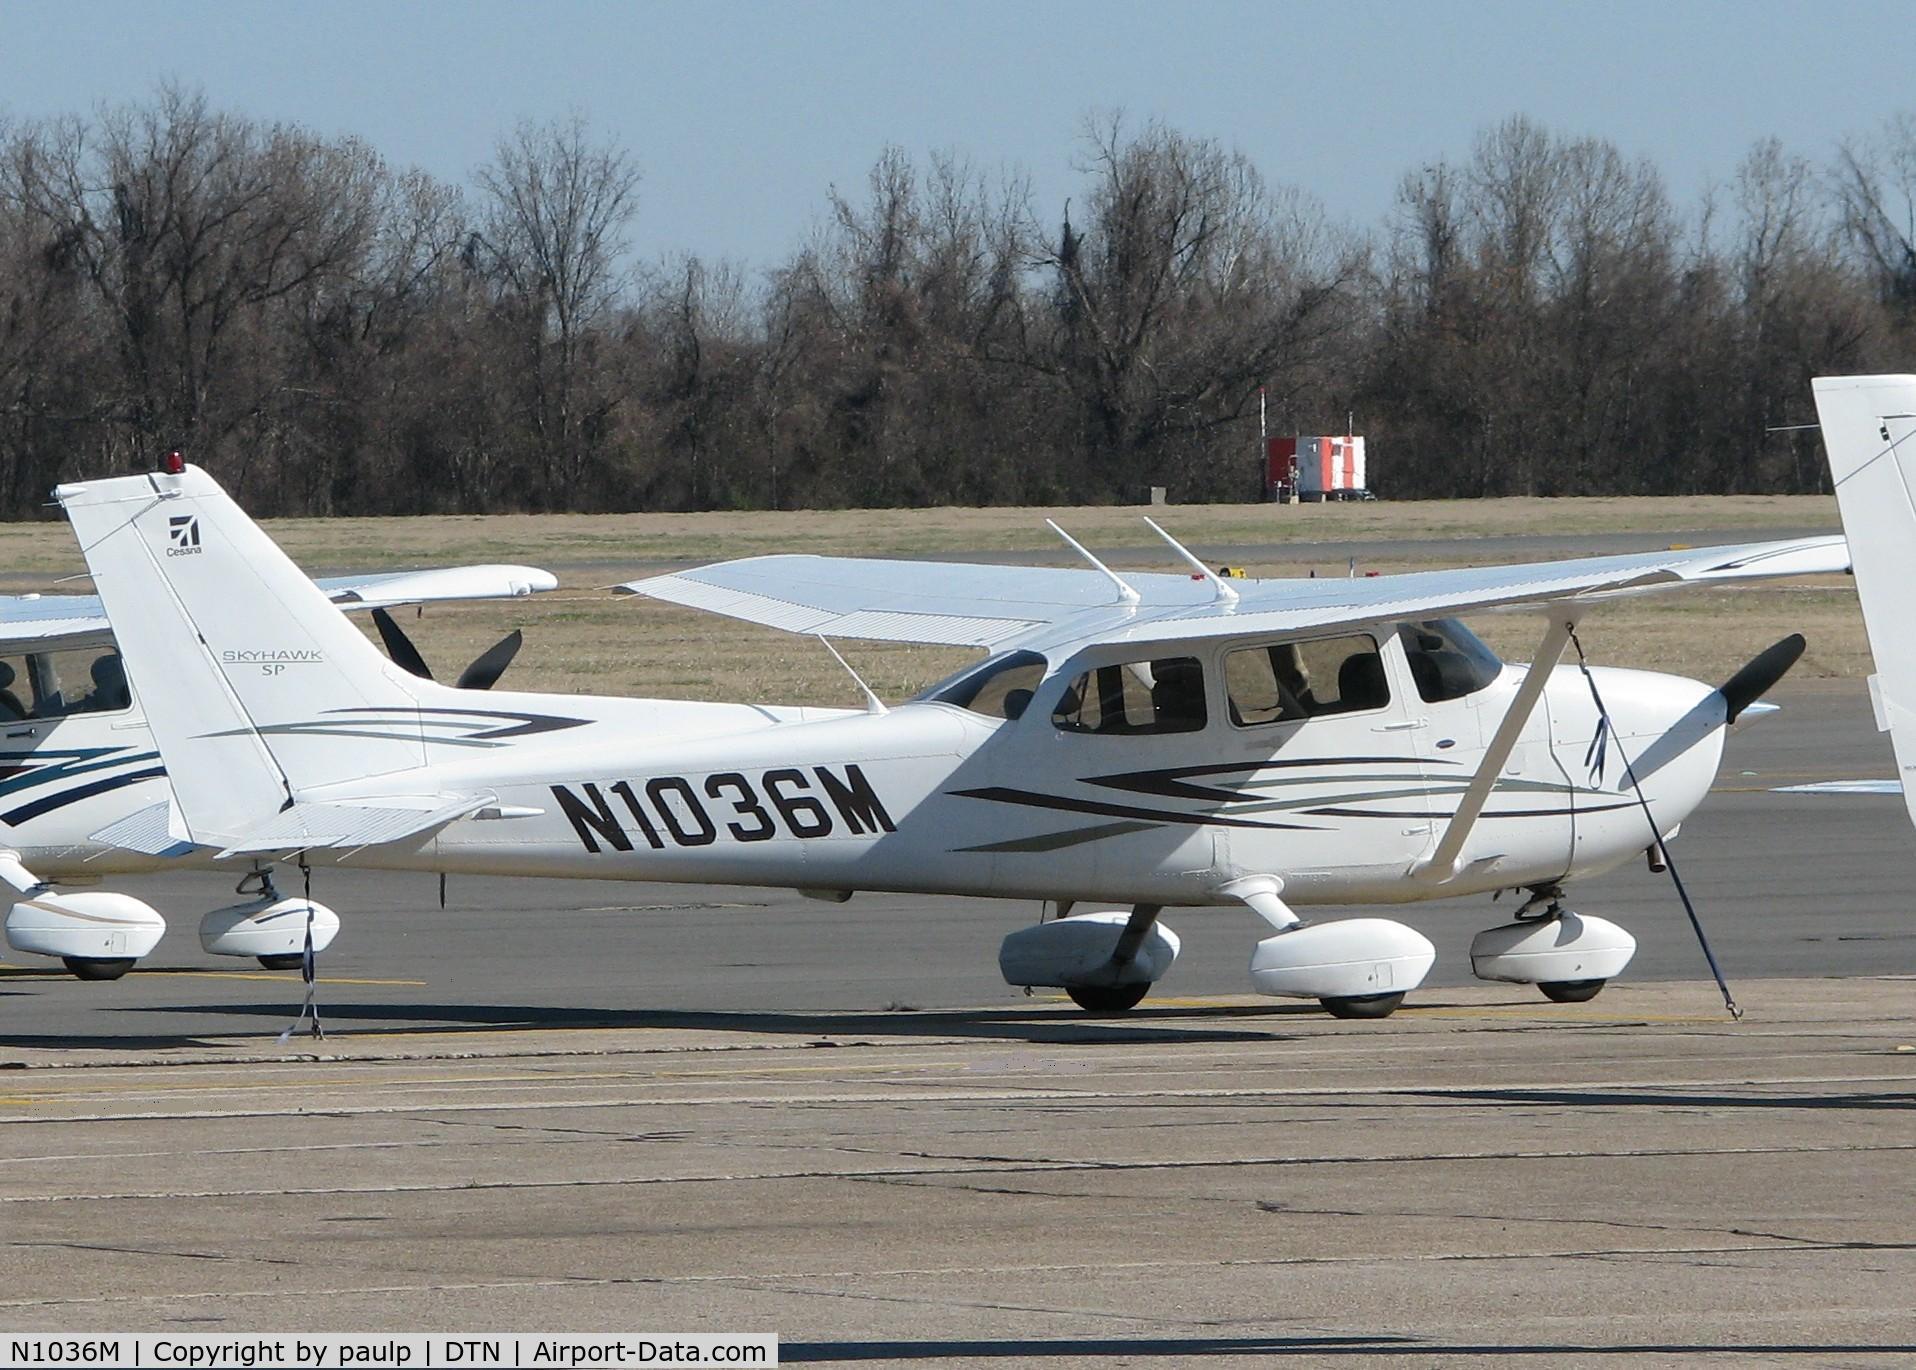 N1036M, 2007 Cessna 172S C/N 172S10599, Parked at Downtown Shreveport.